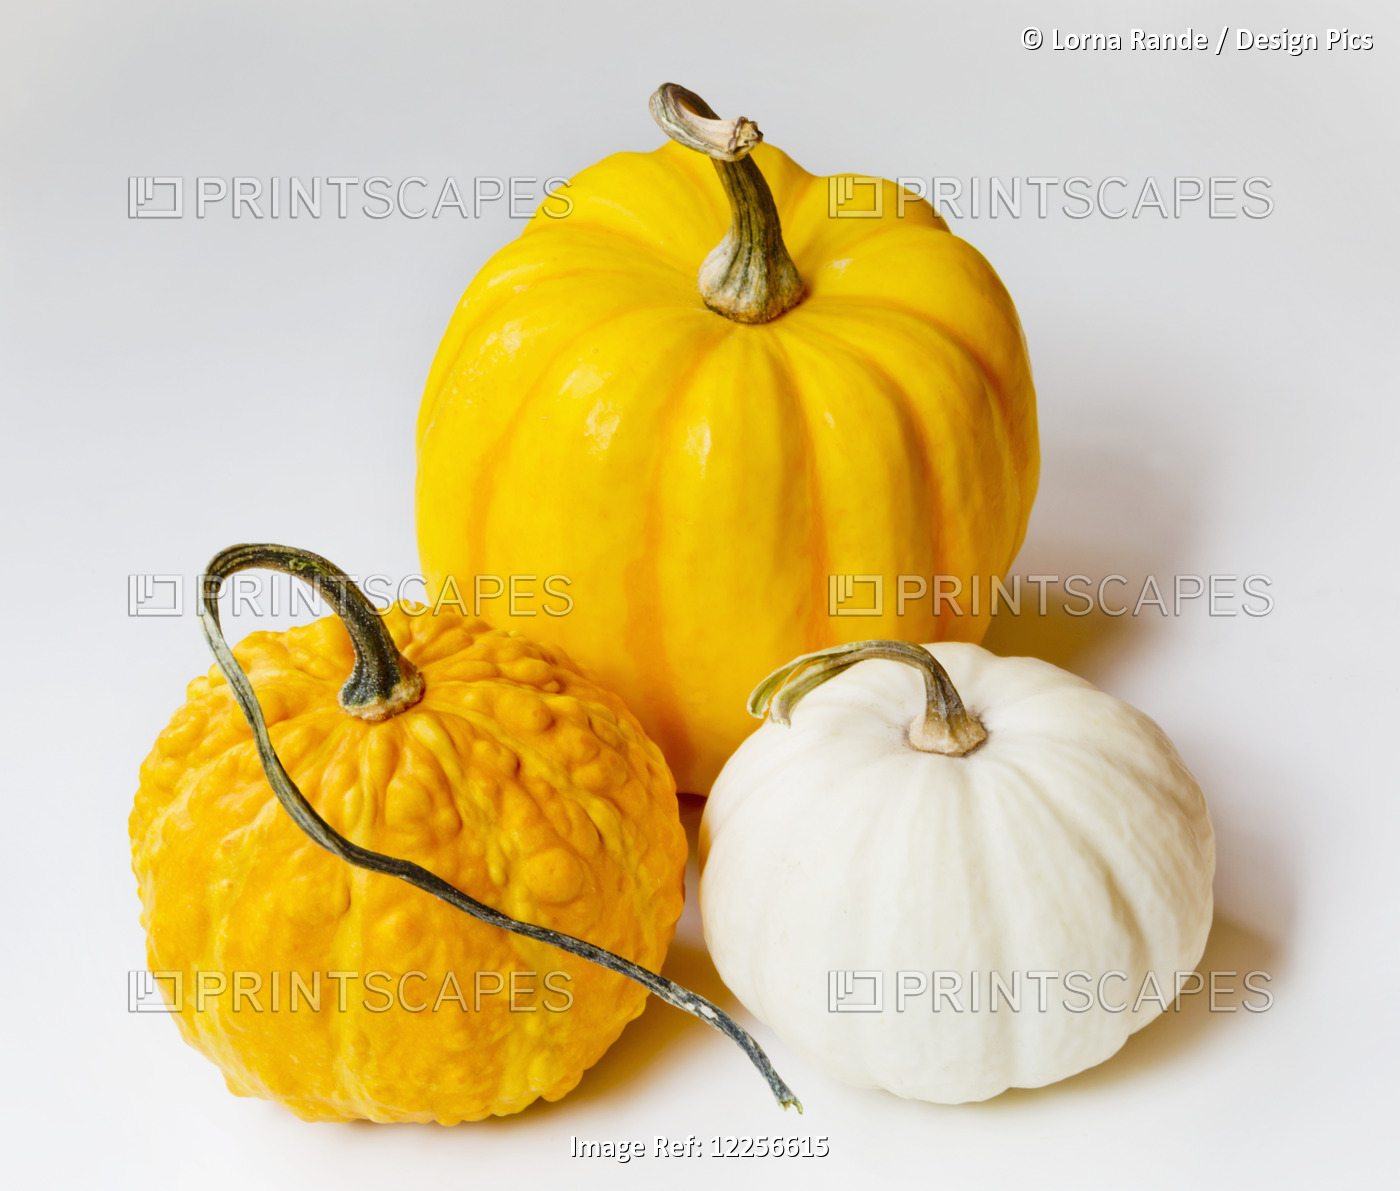 Orange And Yellow Pumpkin And A Squash On A White Background